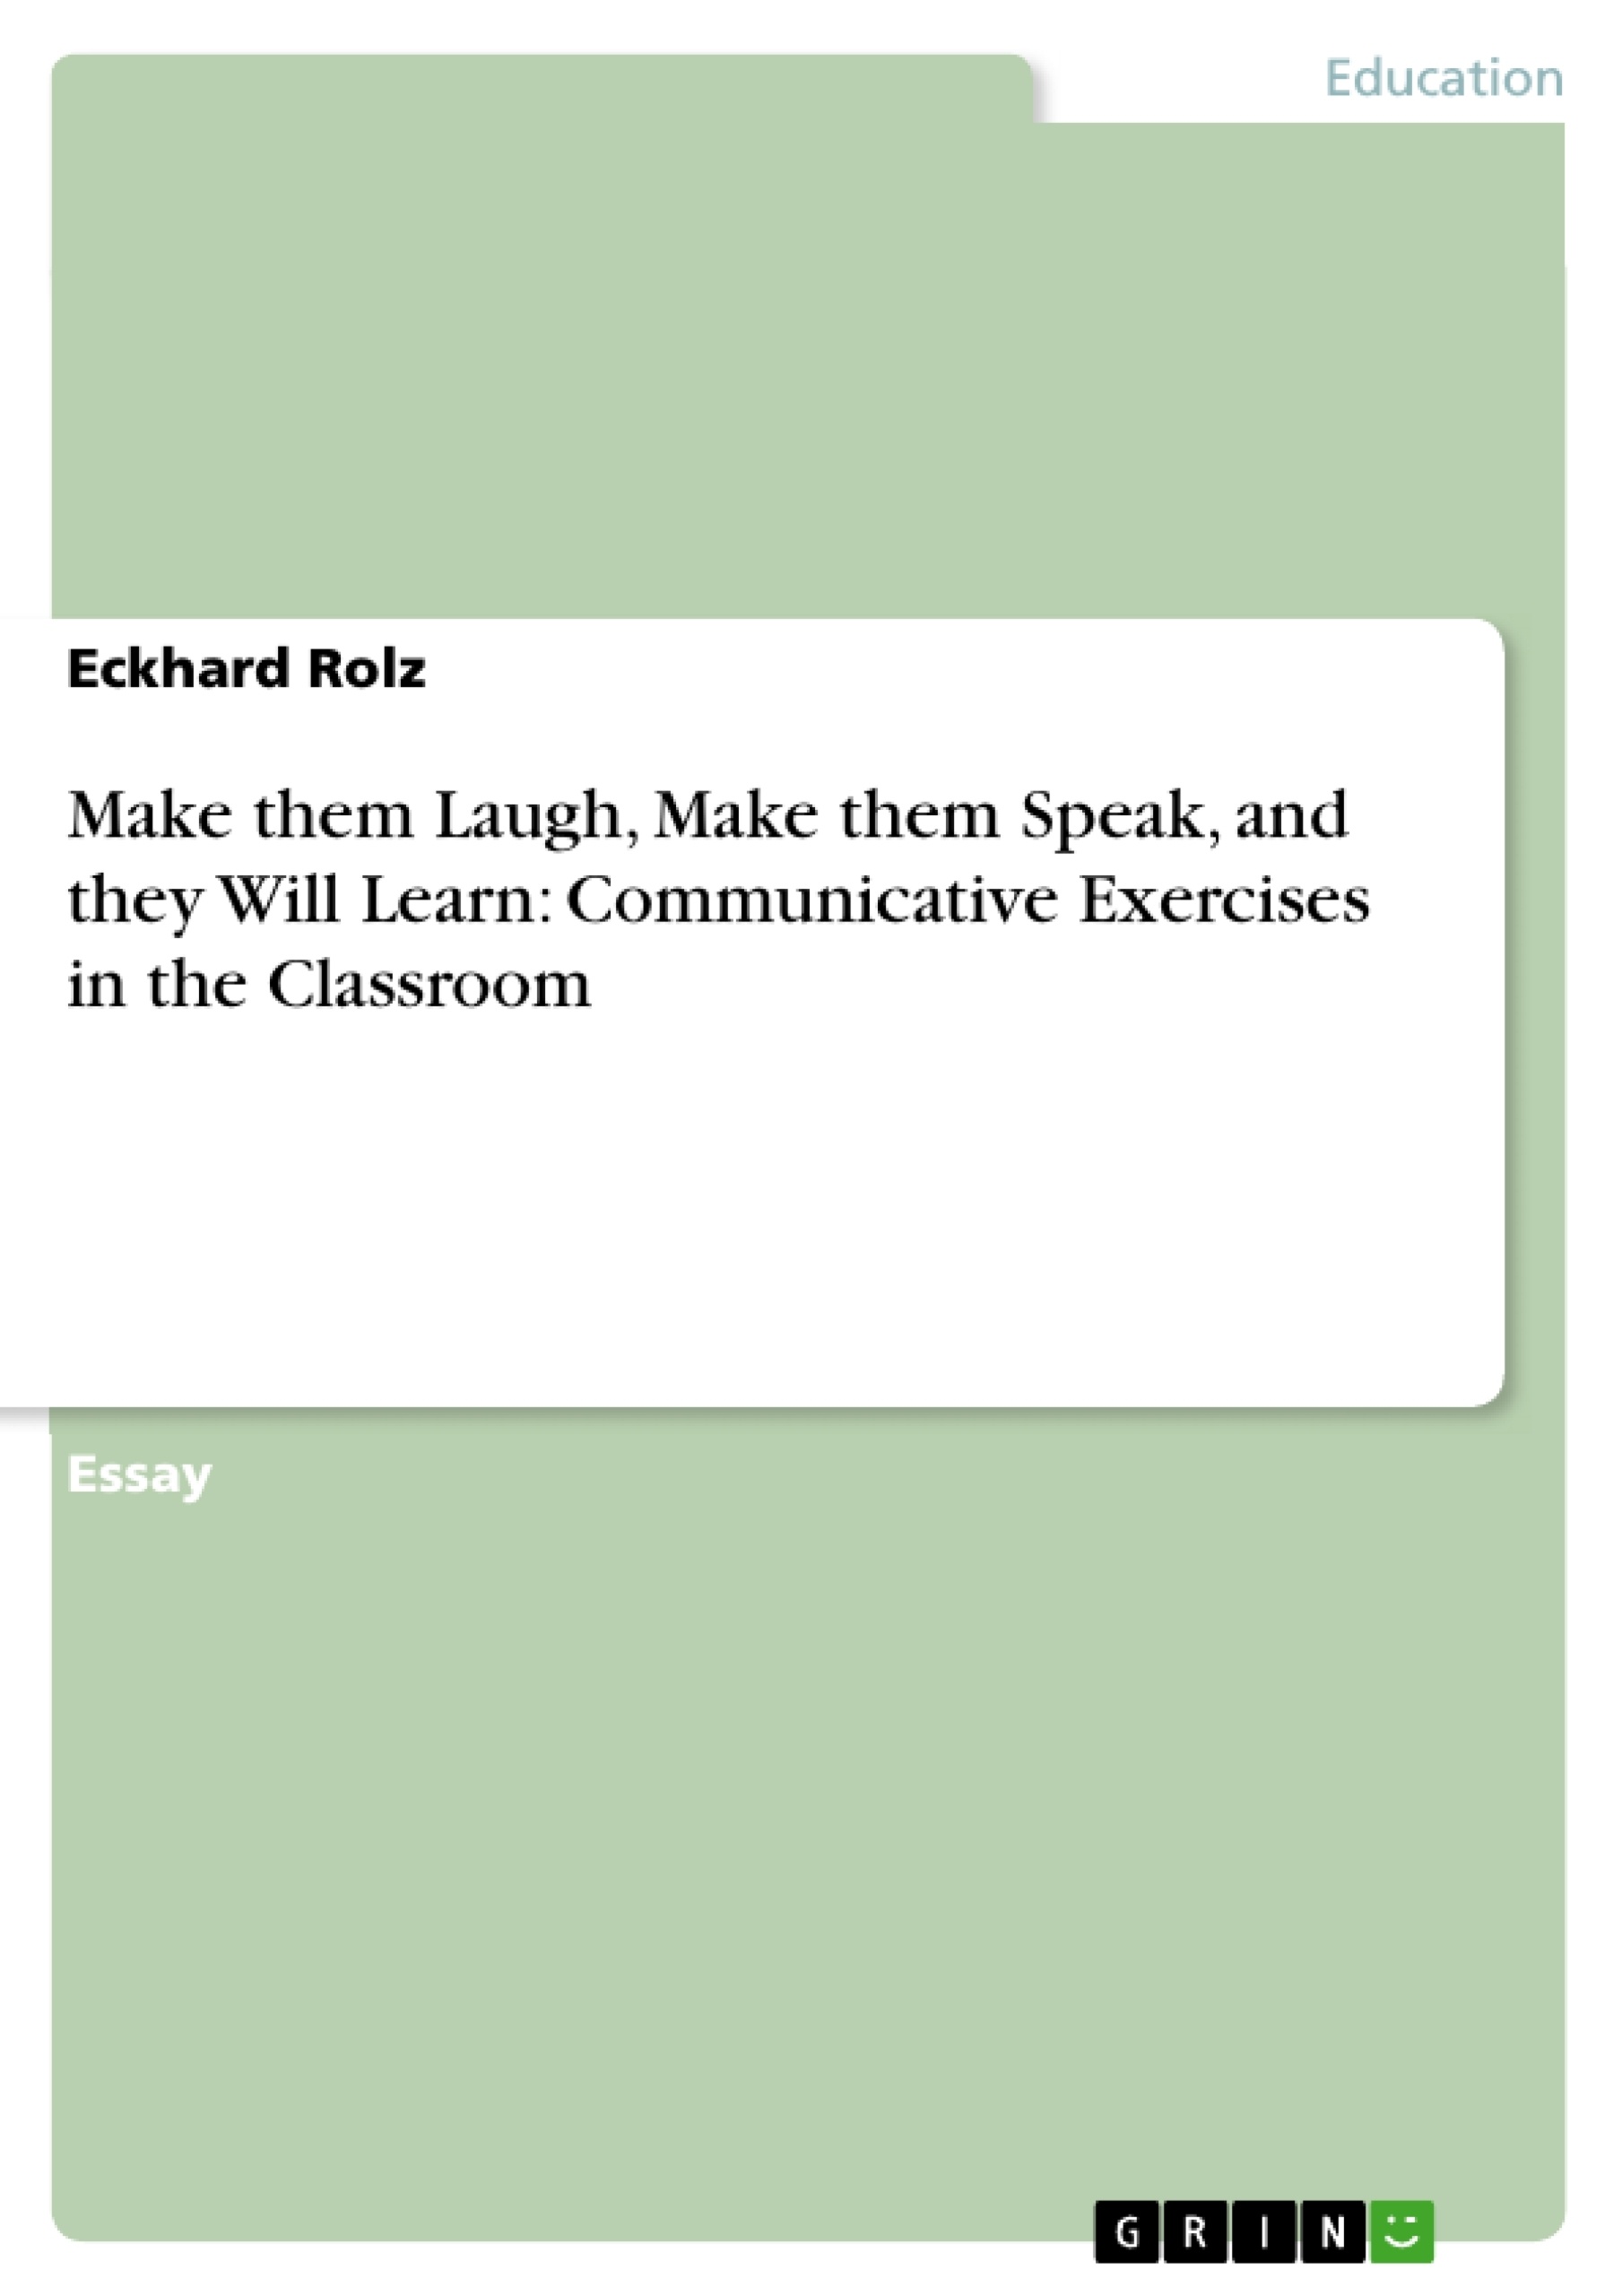 Título: Make them Laugh, Make them Speak, and they Will Learn: Communicative Exercises in the Classroom